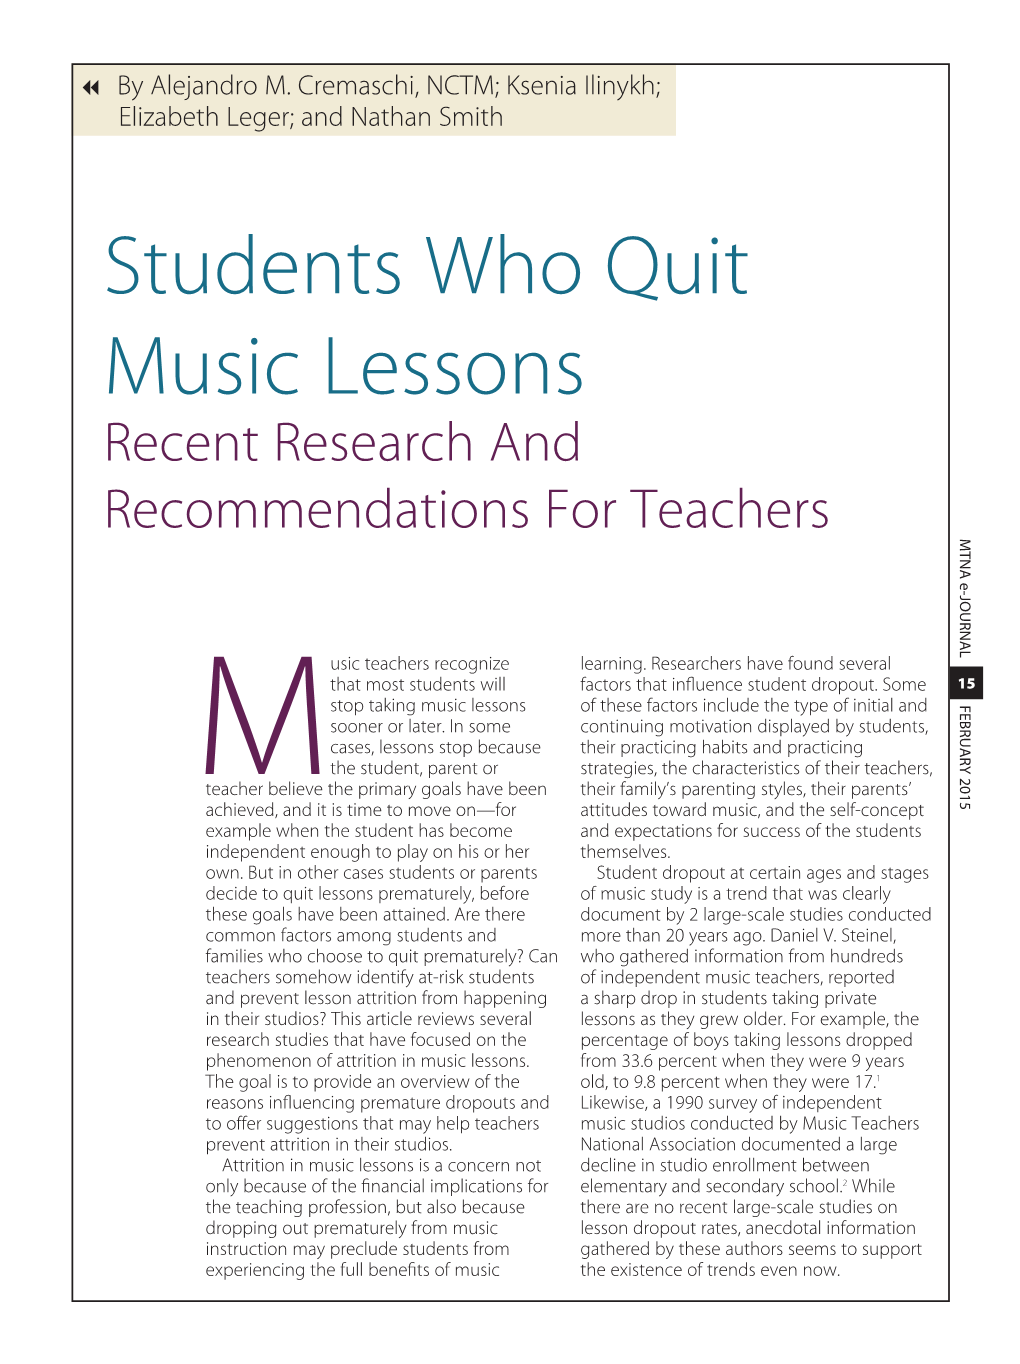 Students who quit music lessons (Recent research and recommendations for teachers)